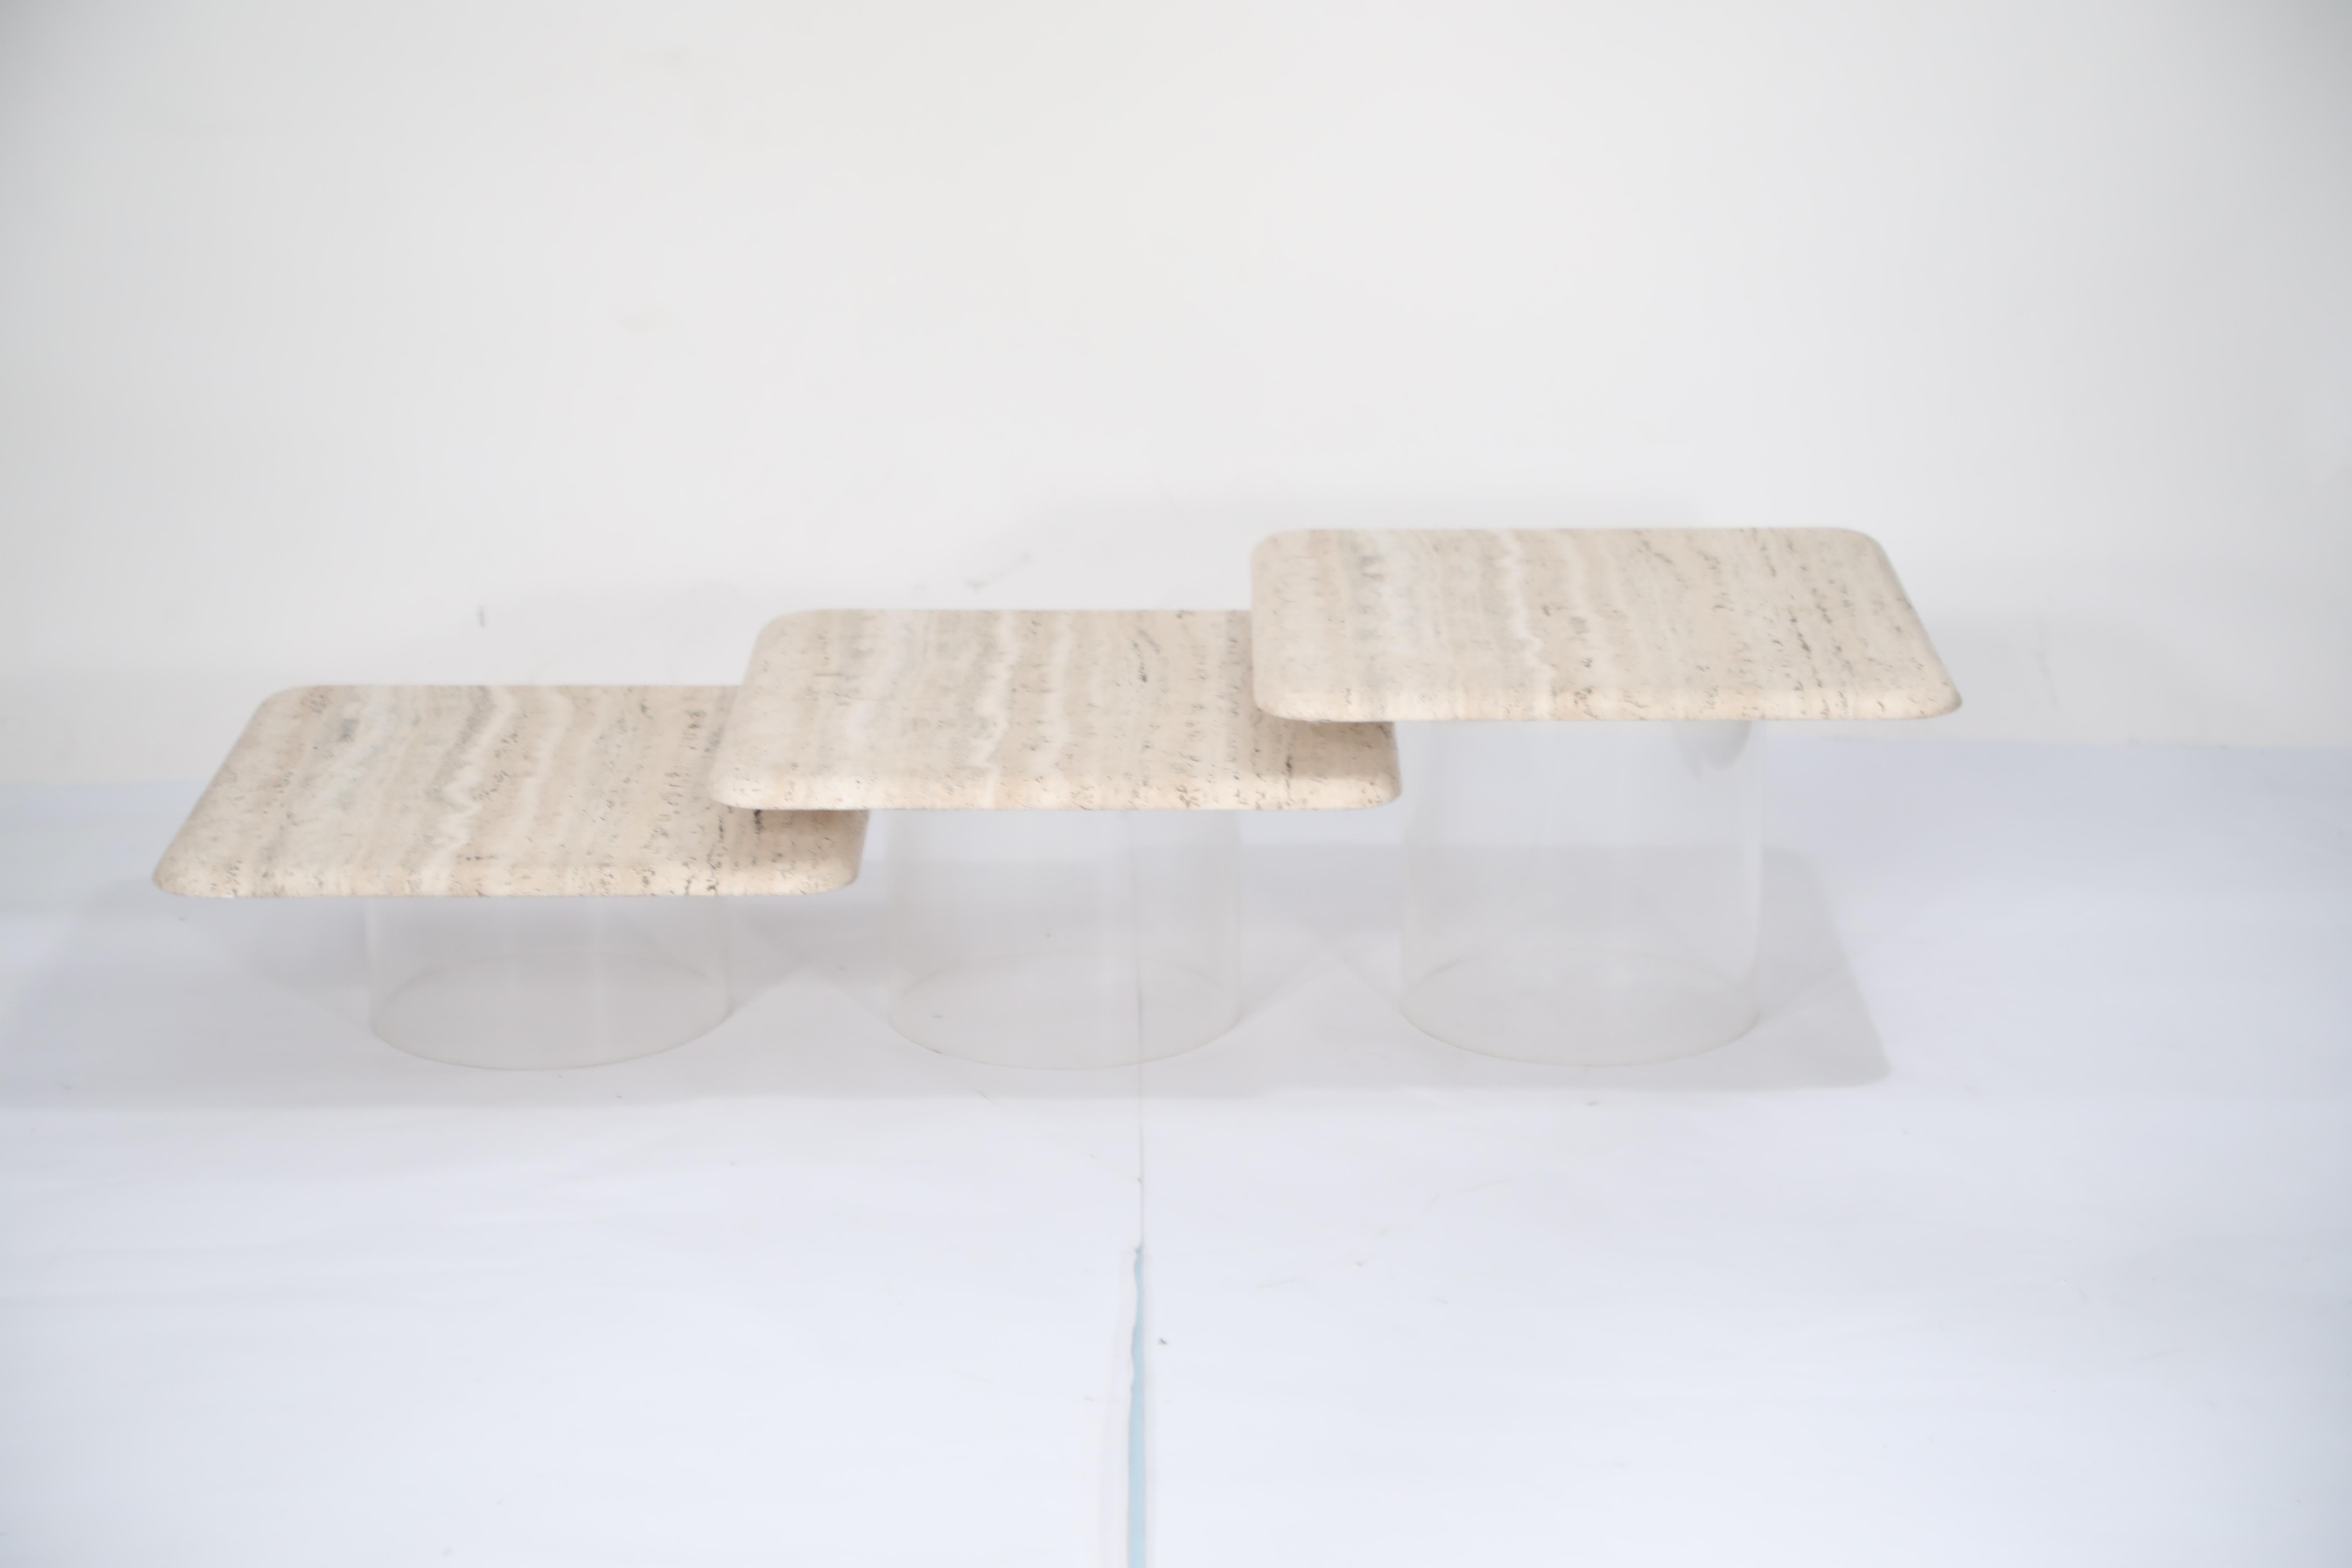 American Set of Three Travertine Tables with Cylindrical Lucite Bases, circa 1970s